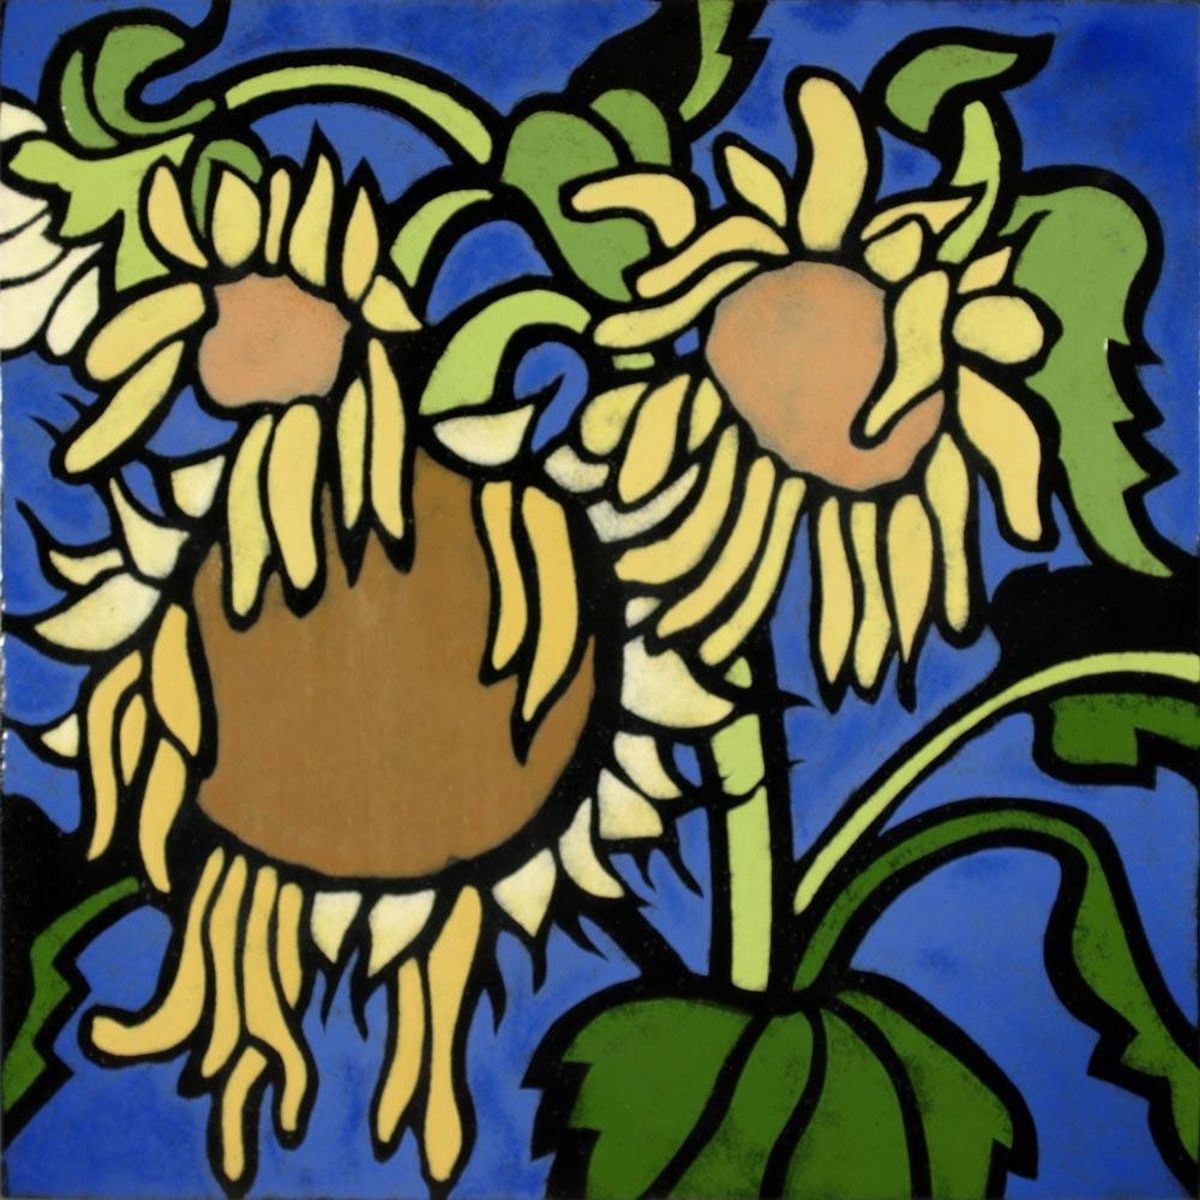 This “Sunflowers” enamel by Harold Balazs is featured in the January exhibit at the Art Spirit Gallery in Coeur d’Alene. (Art Spirit Gallery)